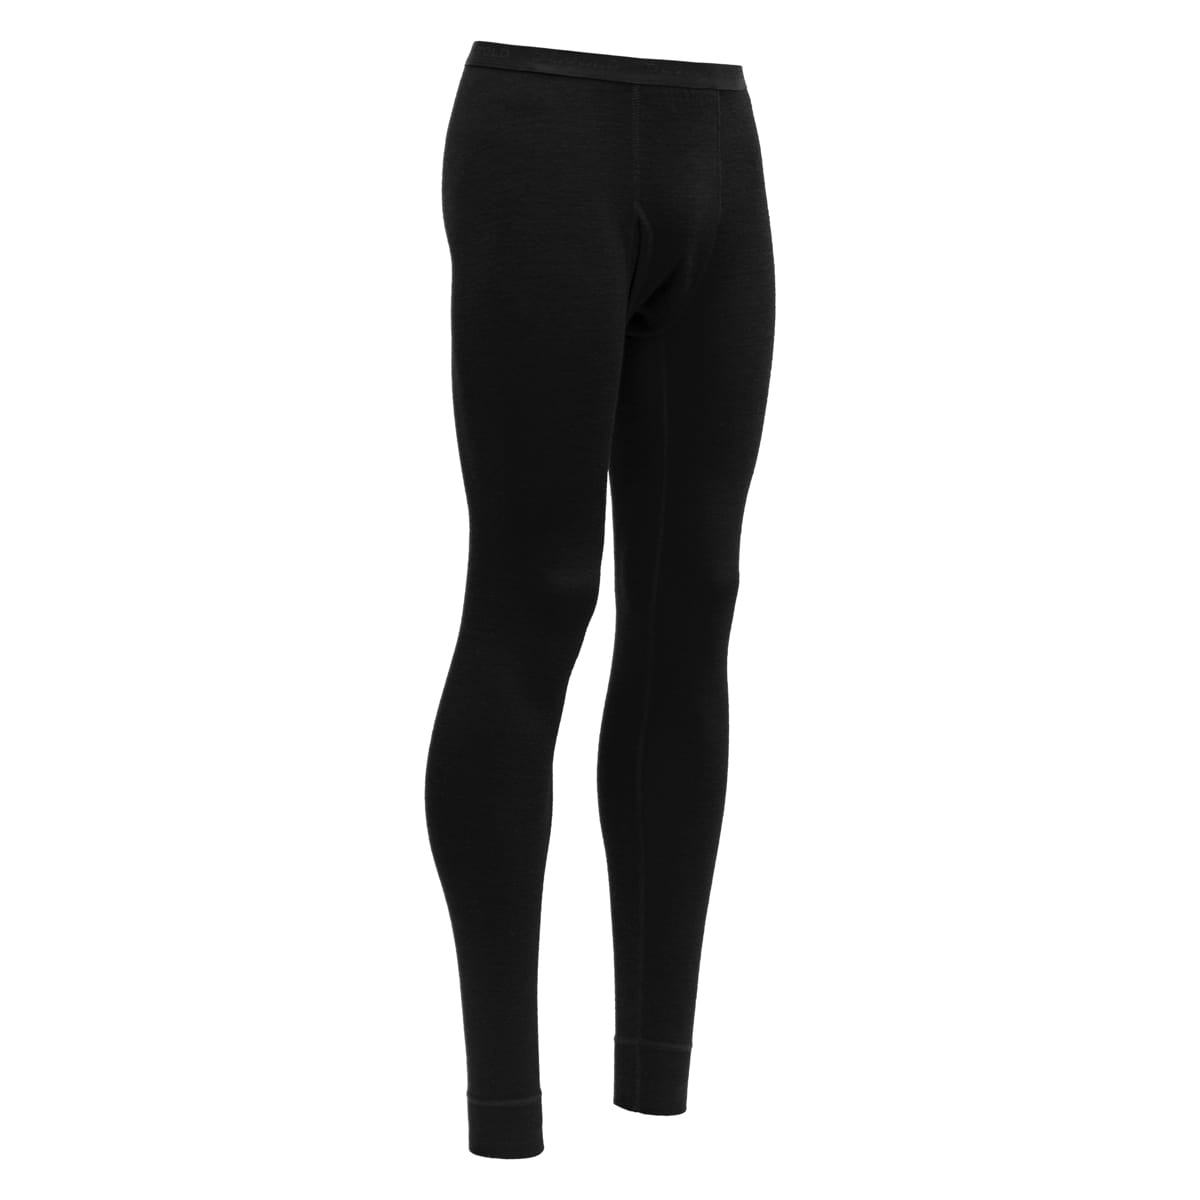 Devold Duo Active Man Long Johns W/Fly Black